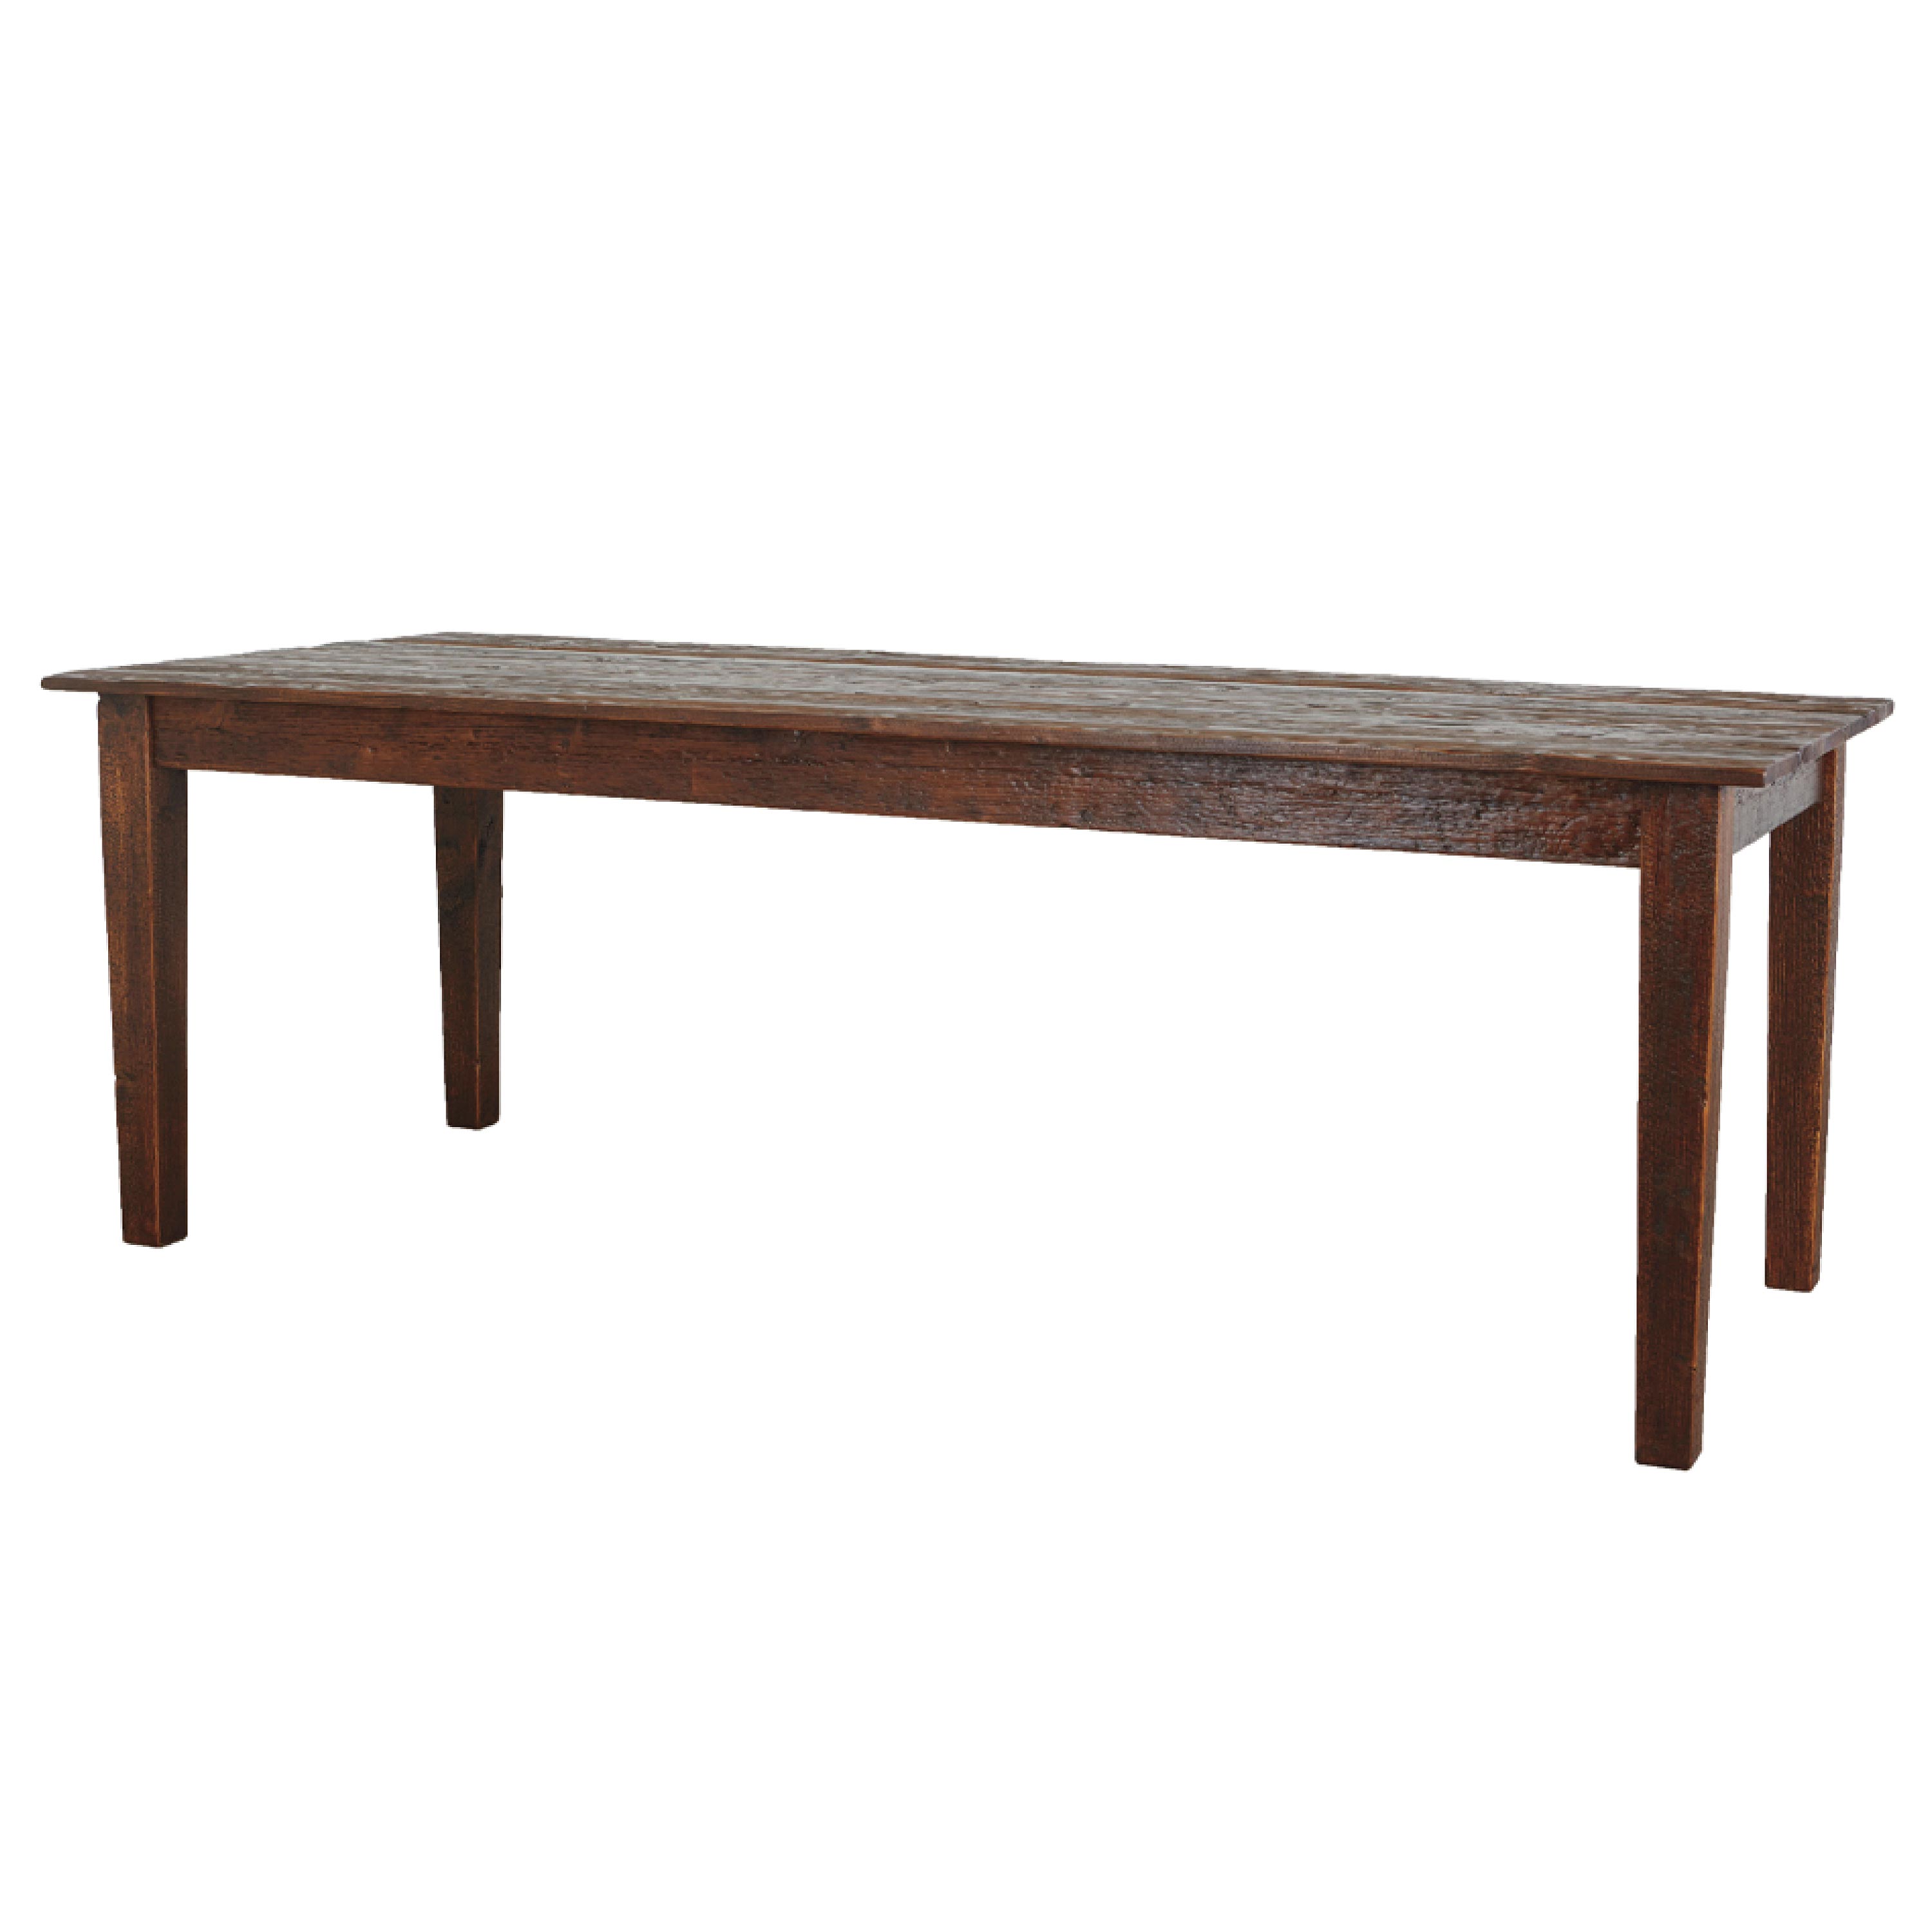 Reclaimed Wood Provence Farm Table, 10ft swatch image